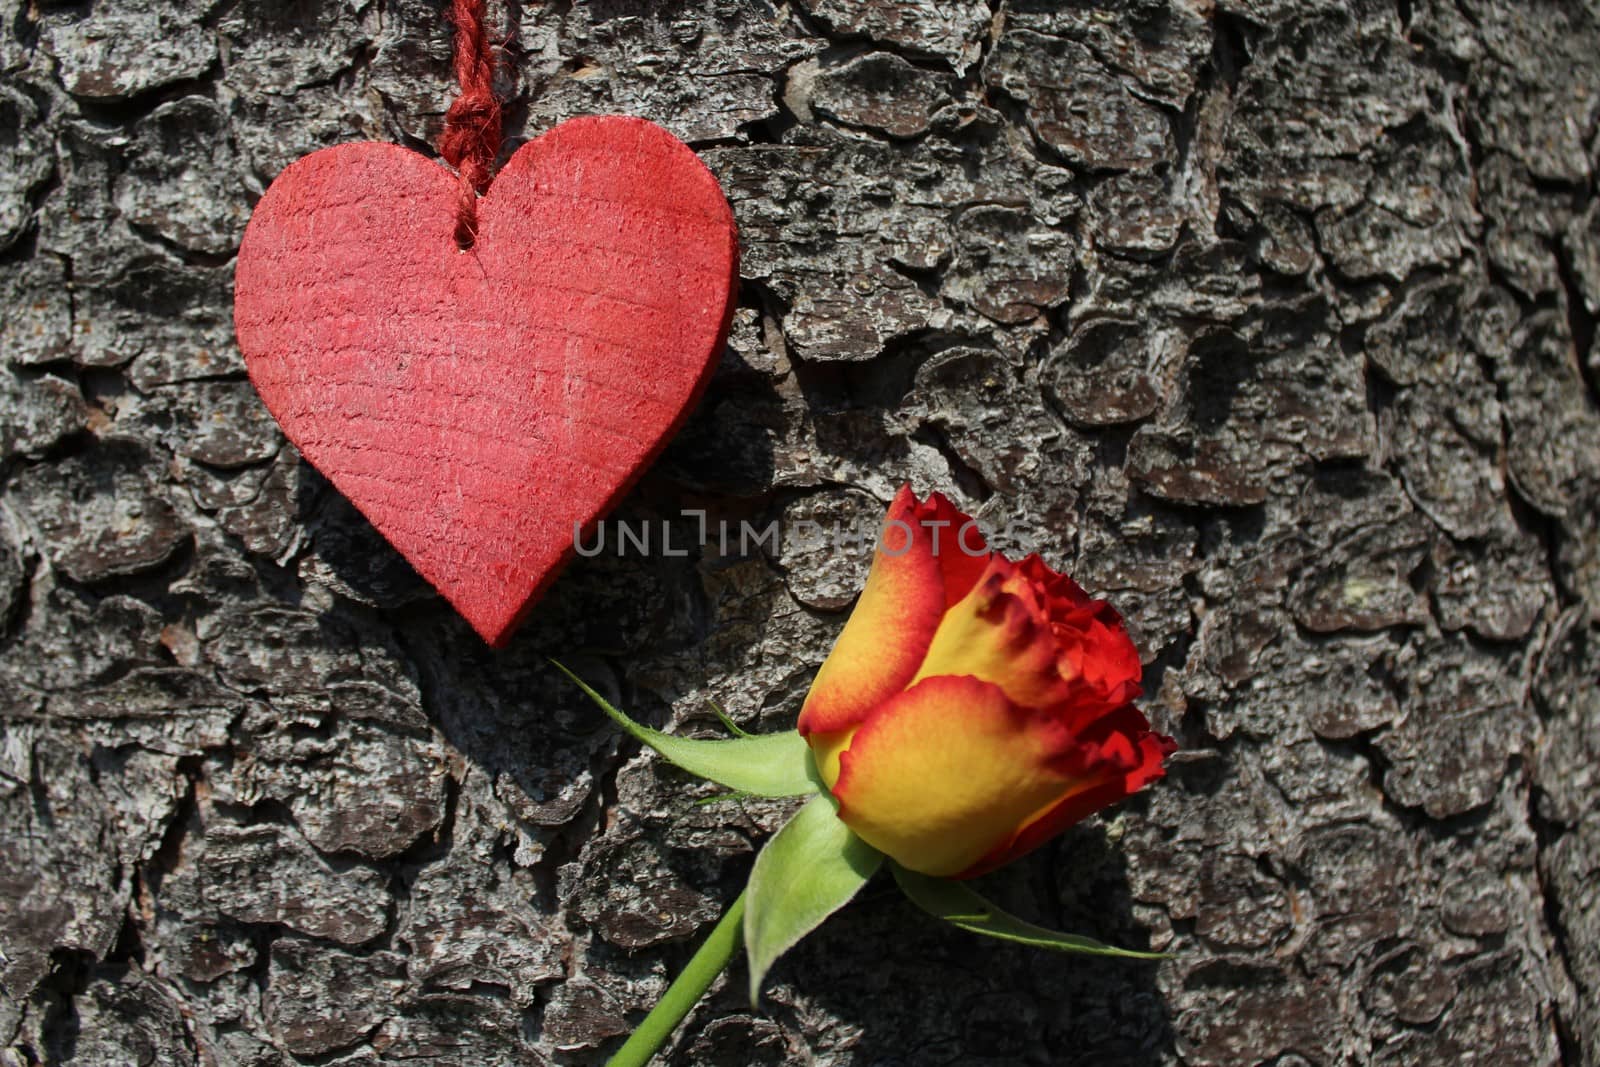 The picture shows a red heart and a rose.